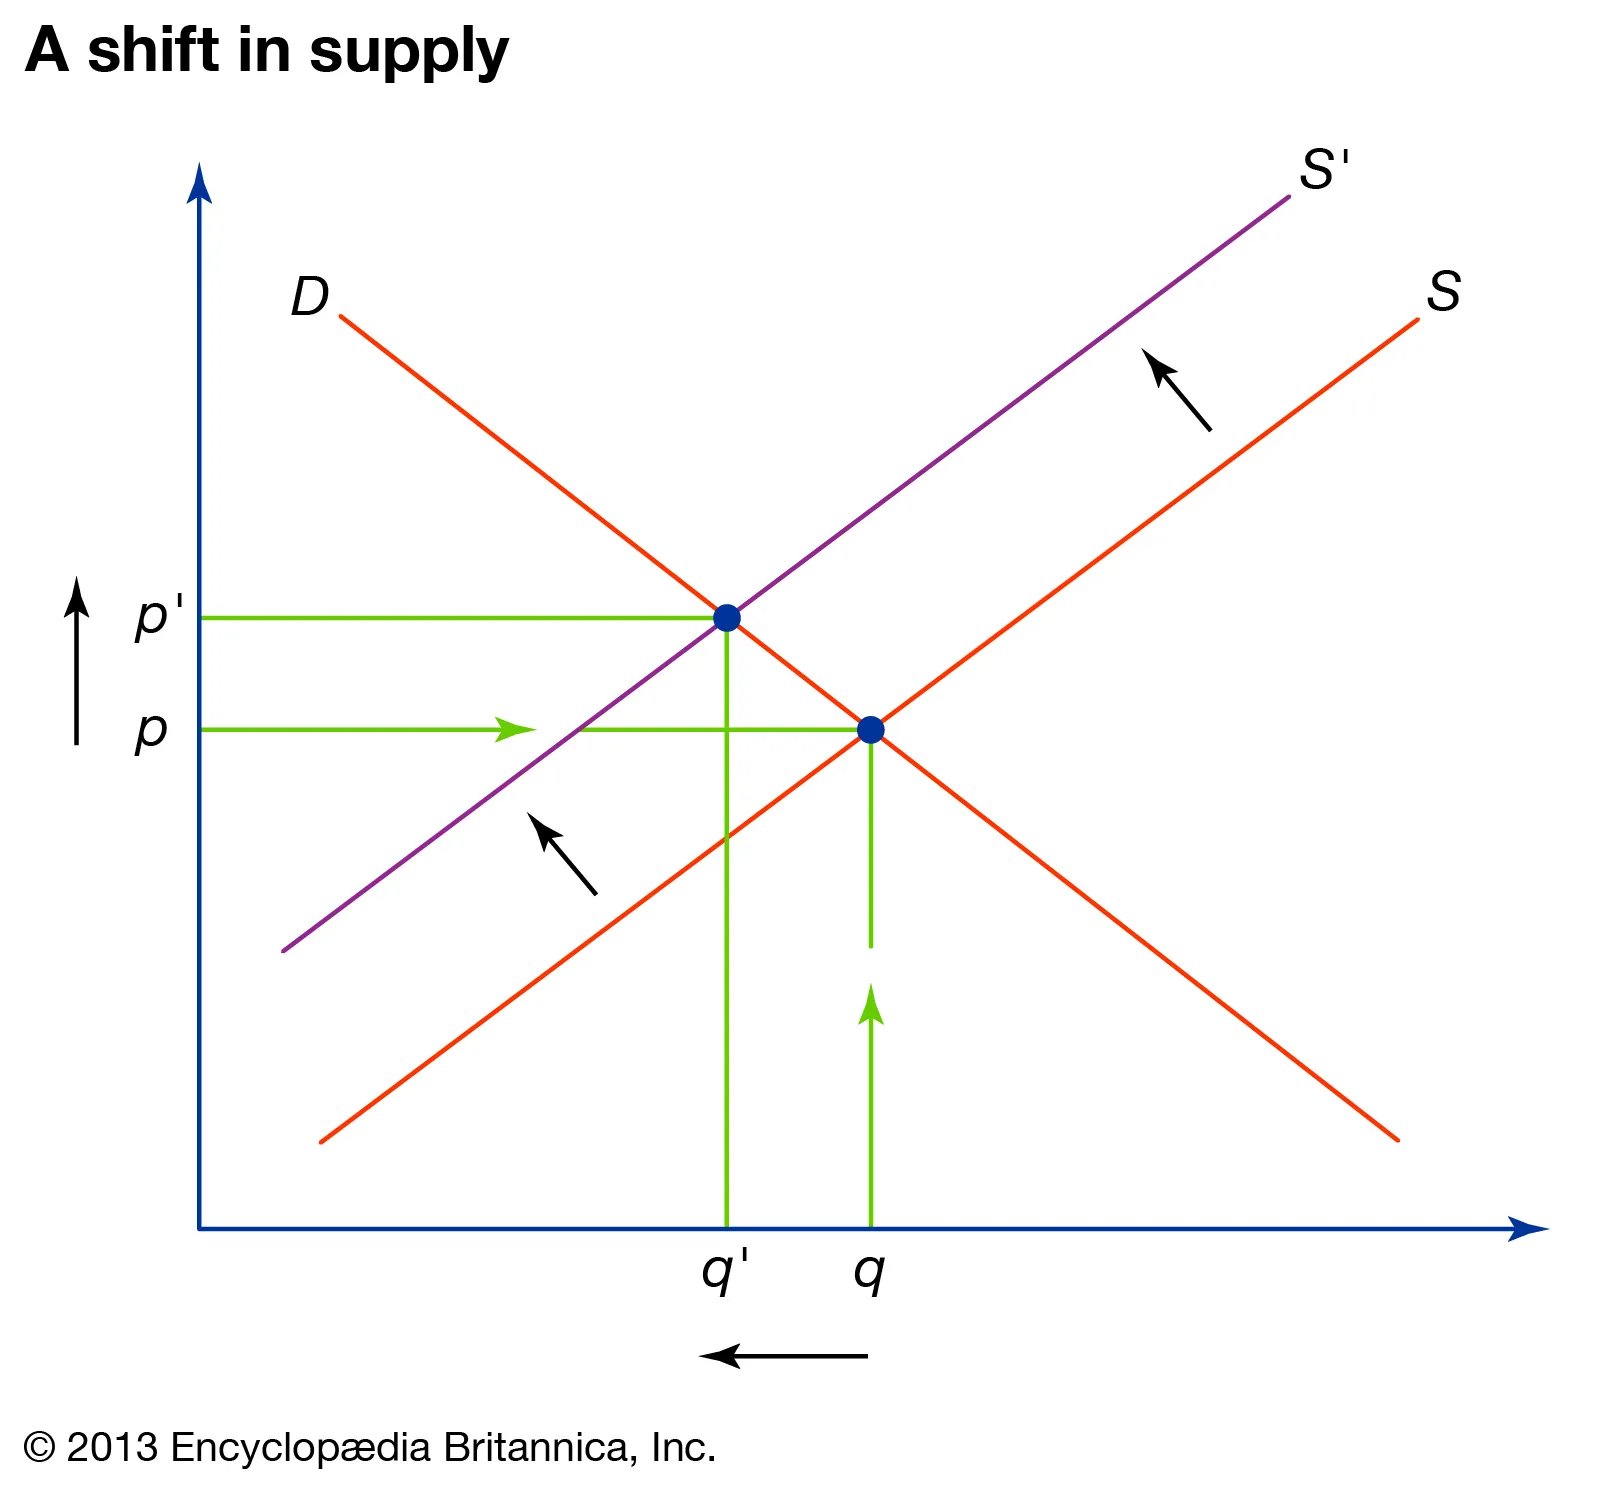  the supply and demand curves